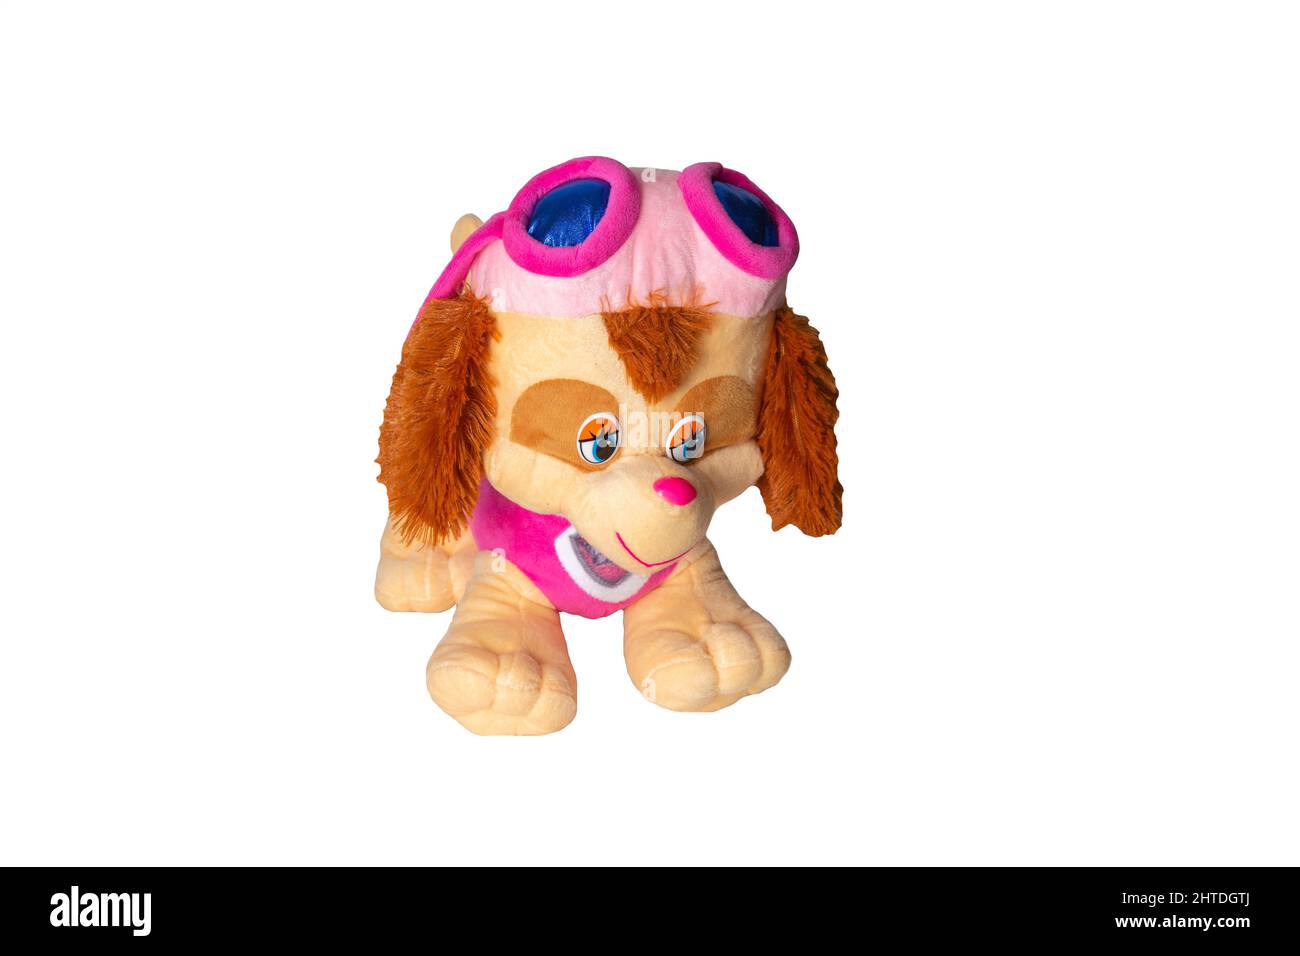 BOBRUISK, BELARUS 20.11.21: Paw patrol soft toy on a white background, isolate. The main character of the wiki with glasses on his head, close-up Stock Photo